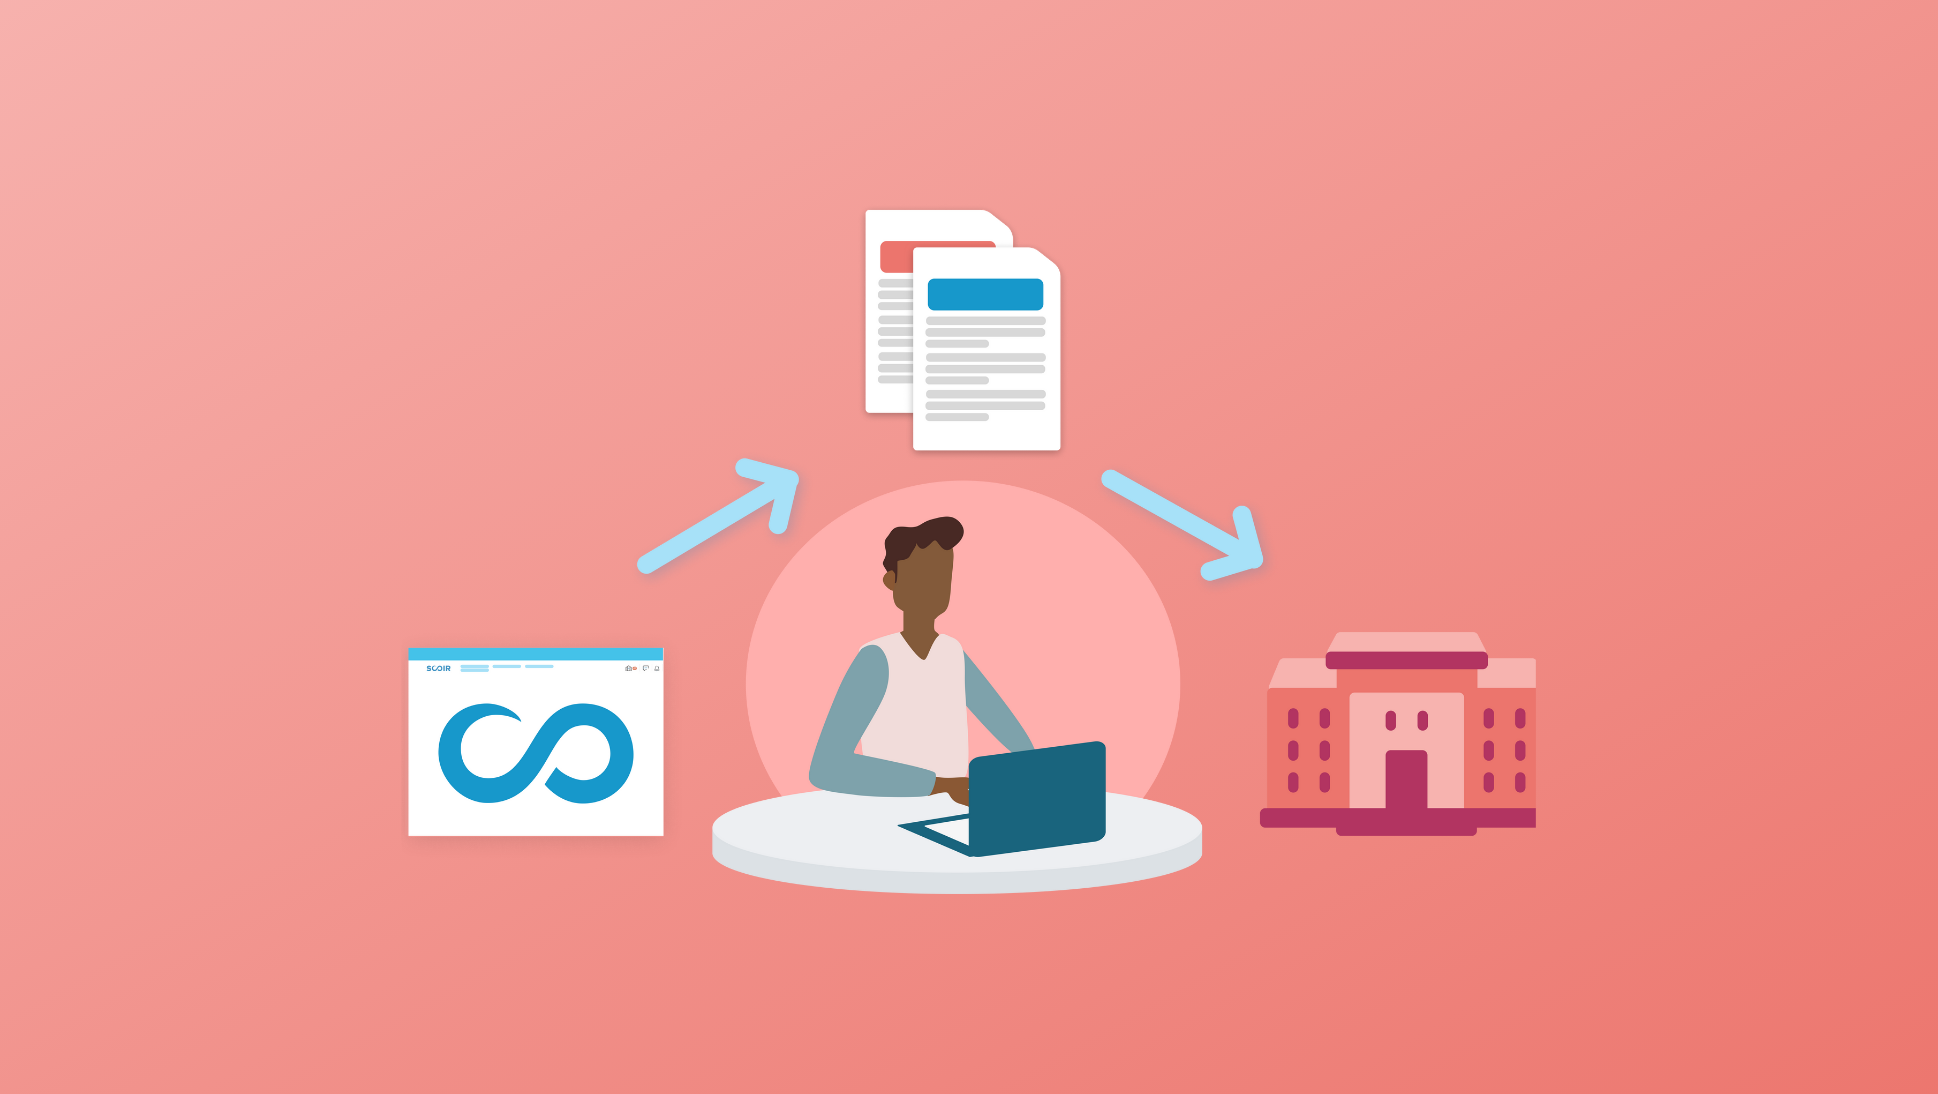 Why Scoir Isn't Your Typical College Student Recruitment Tool - illustration of person working at laptop with Scoir logo, with an arrow pointing to documents, then an arrow pointing to a college building